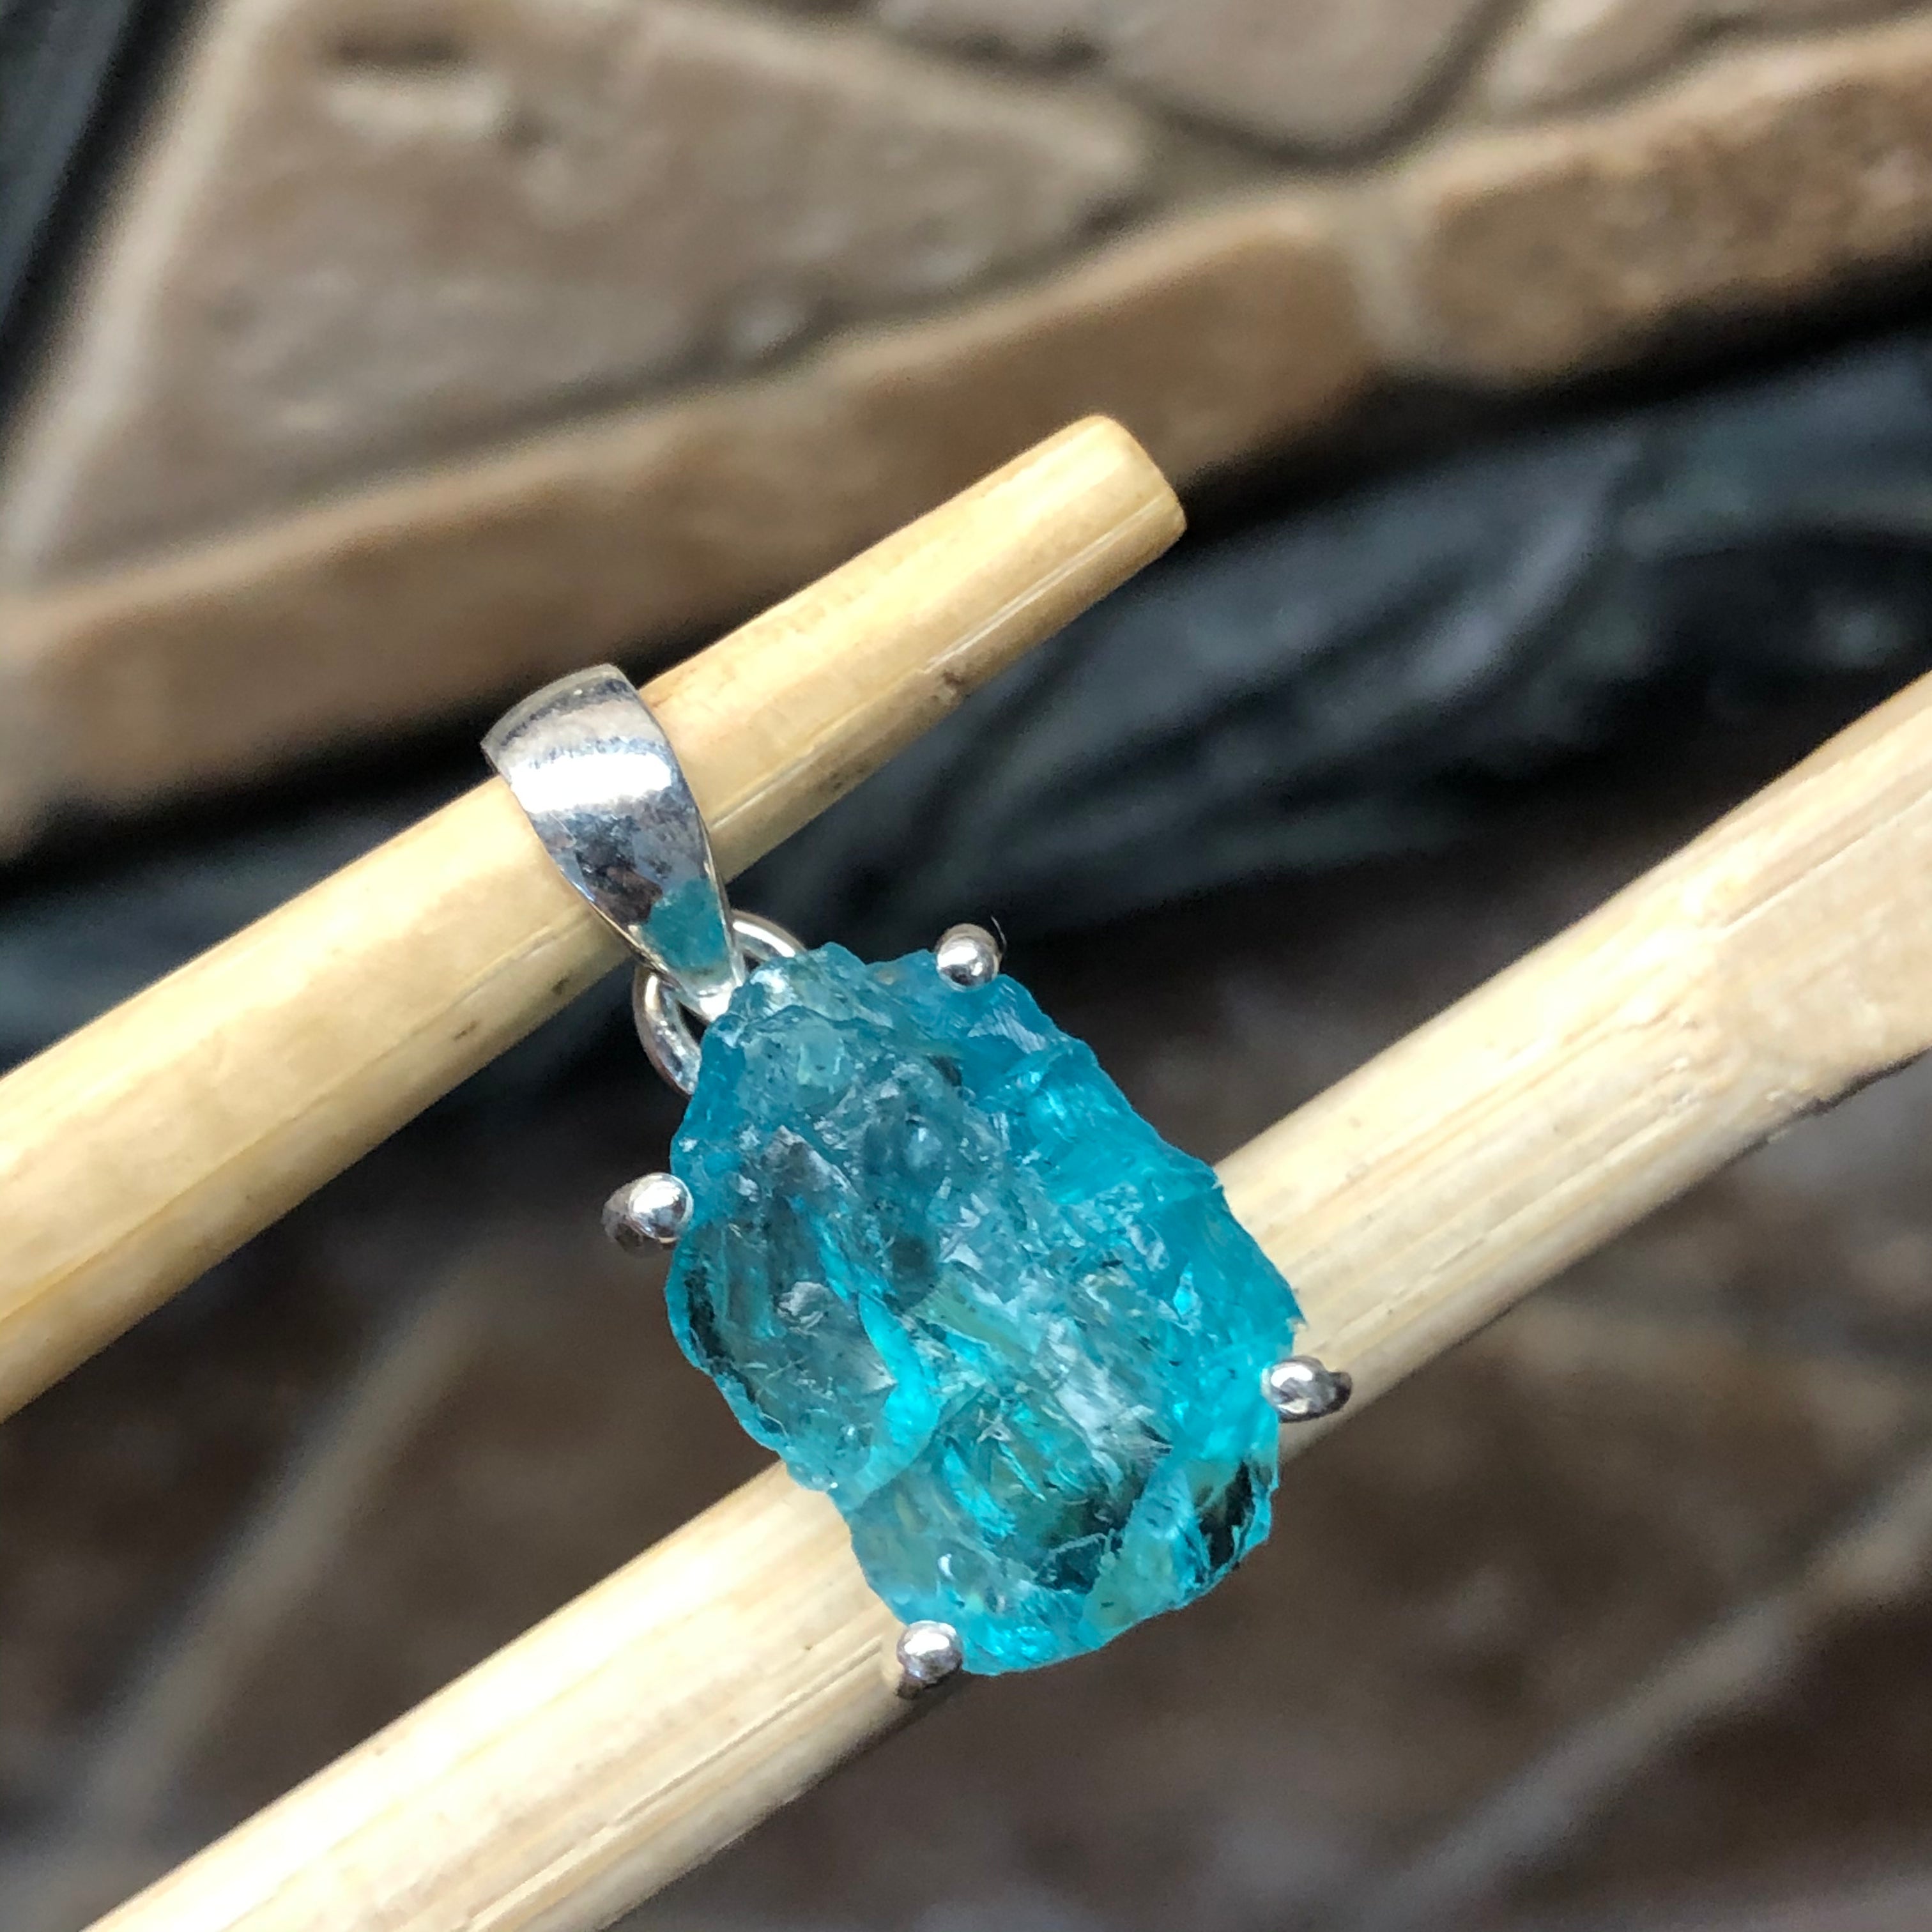 Genuine Neon Blue Apatite 925 Solid Sterling Silver Pendant 22mm - Natural Rocks by Kala